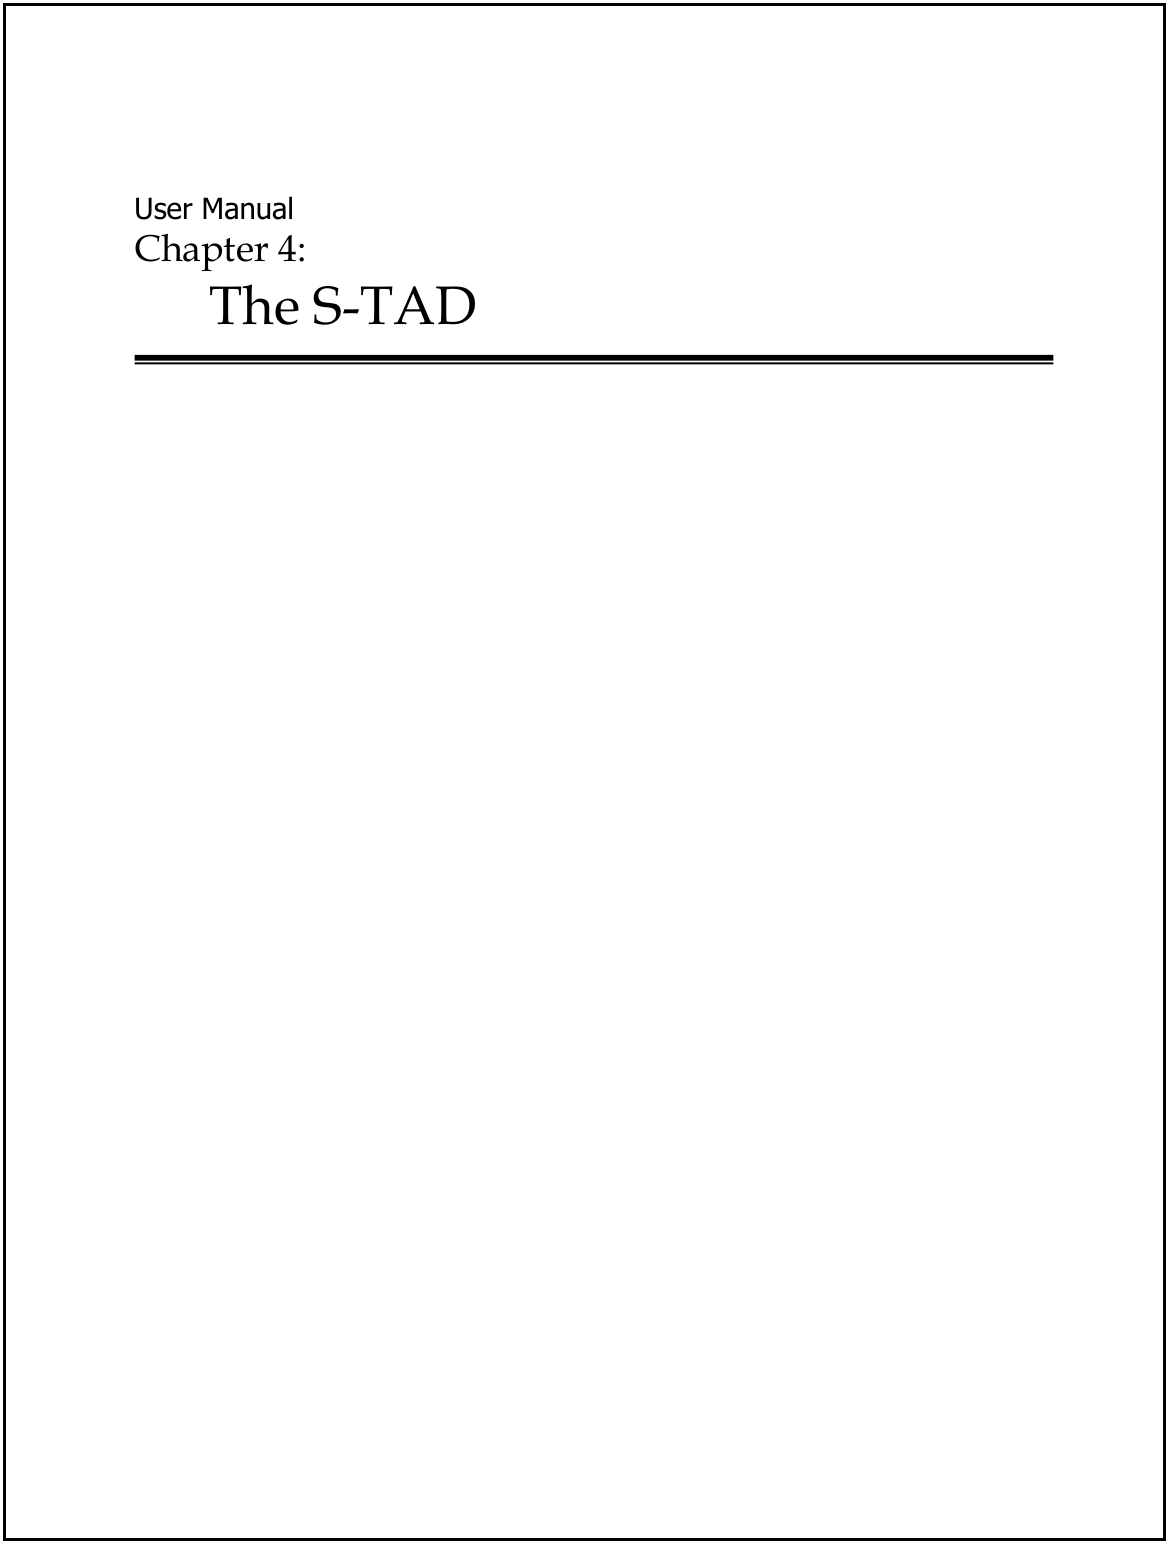  User Manual Chapter 4:  The S-TAD      